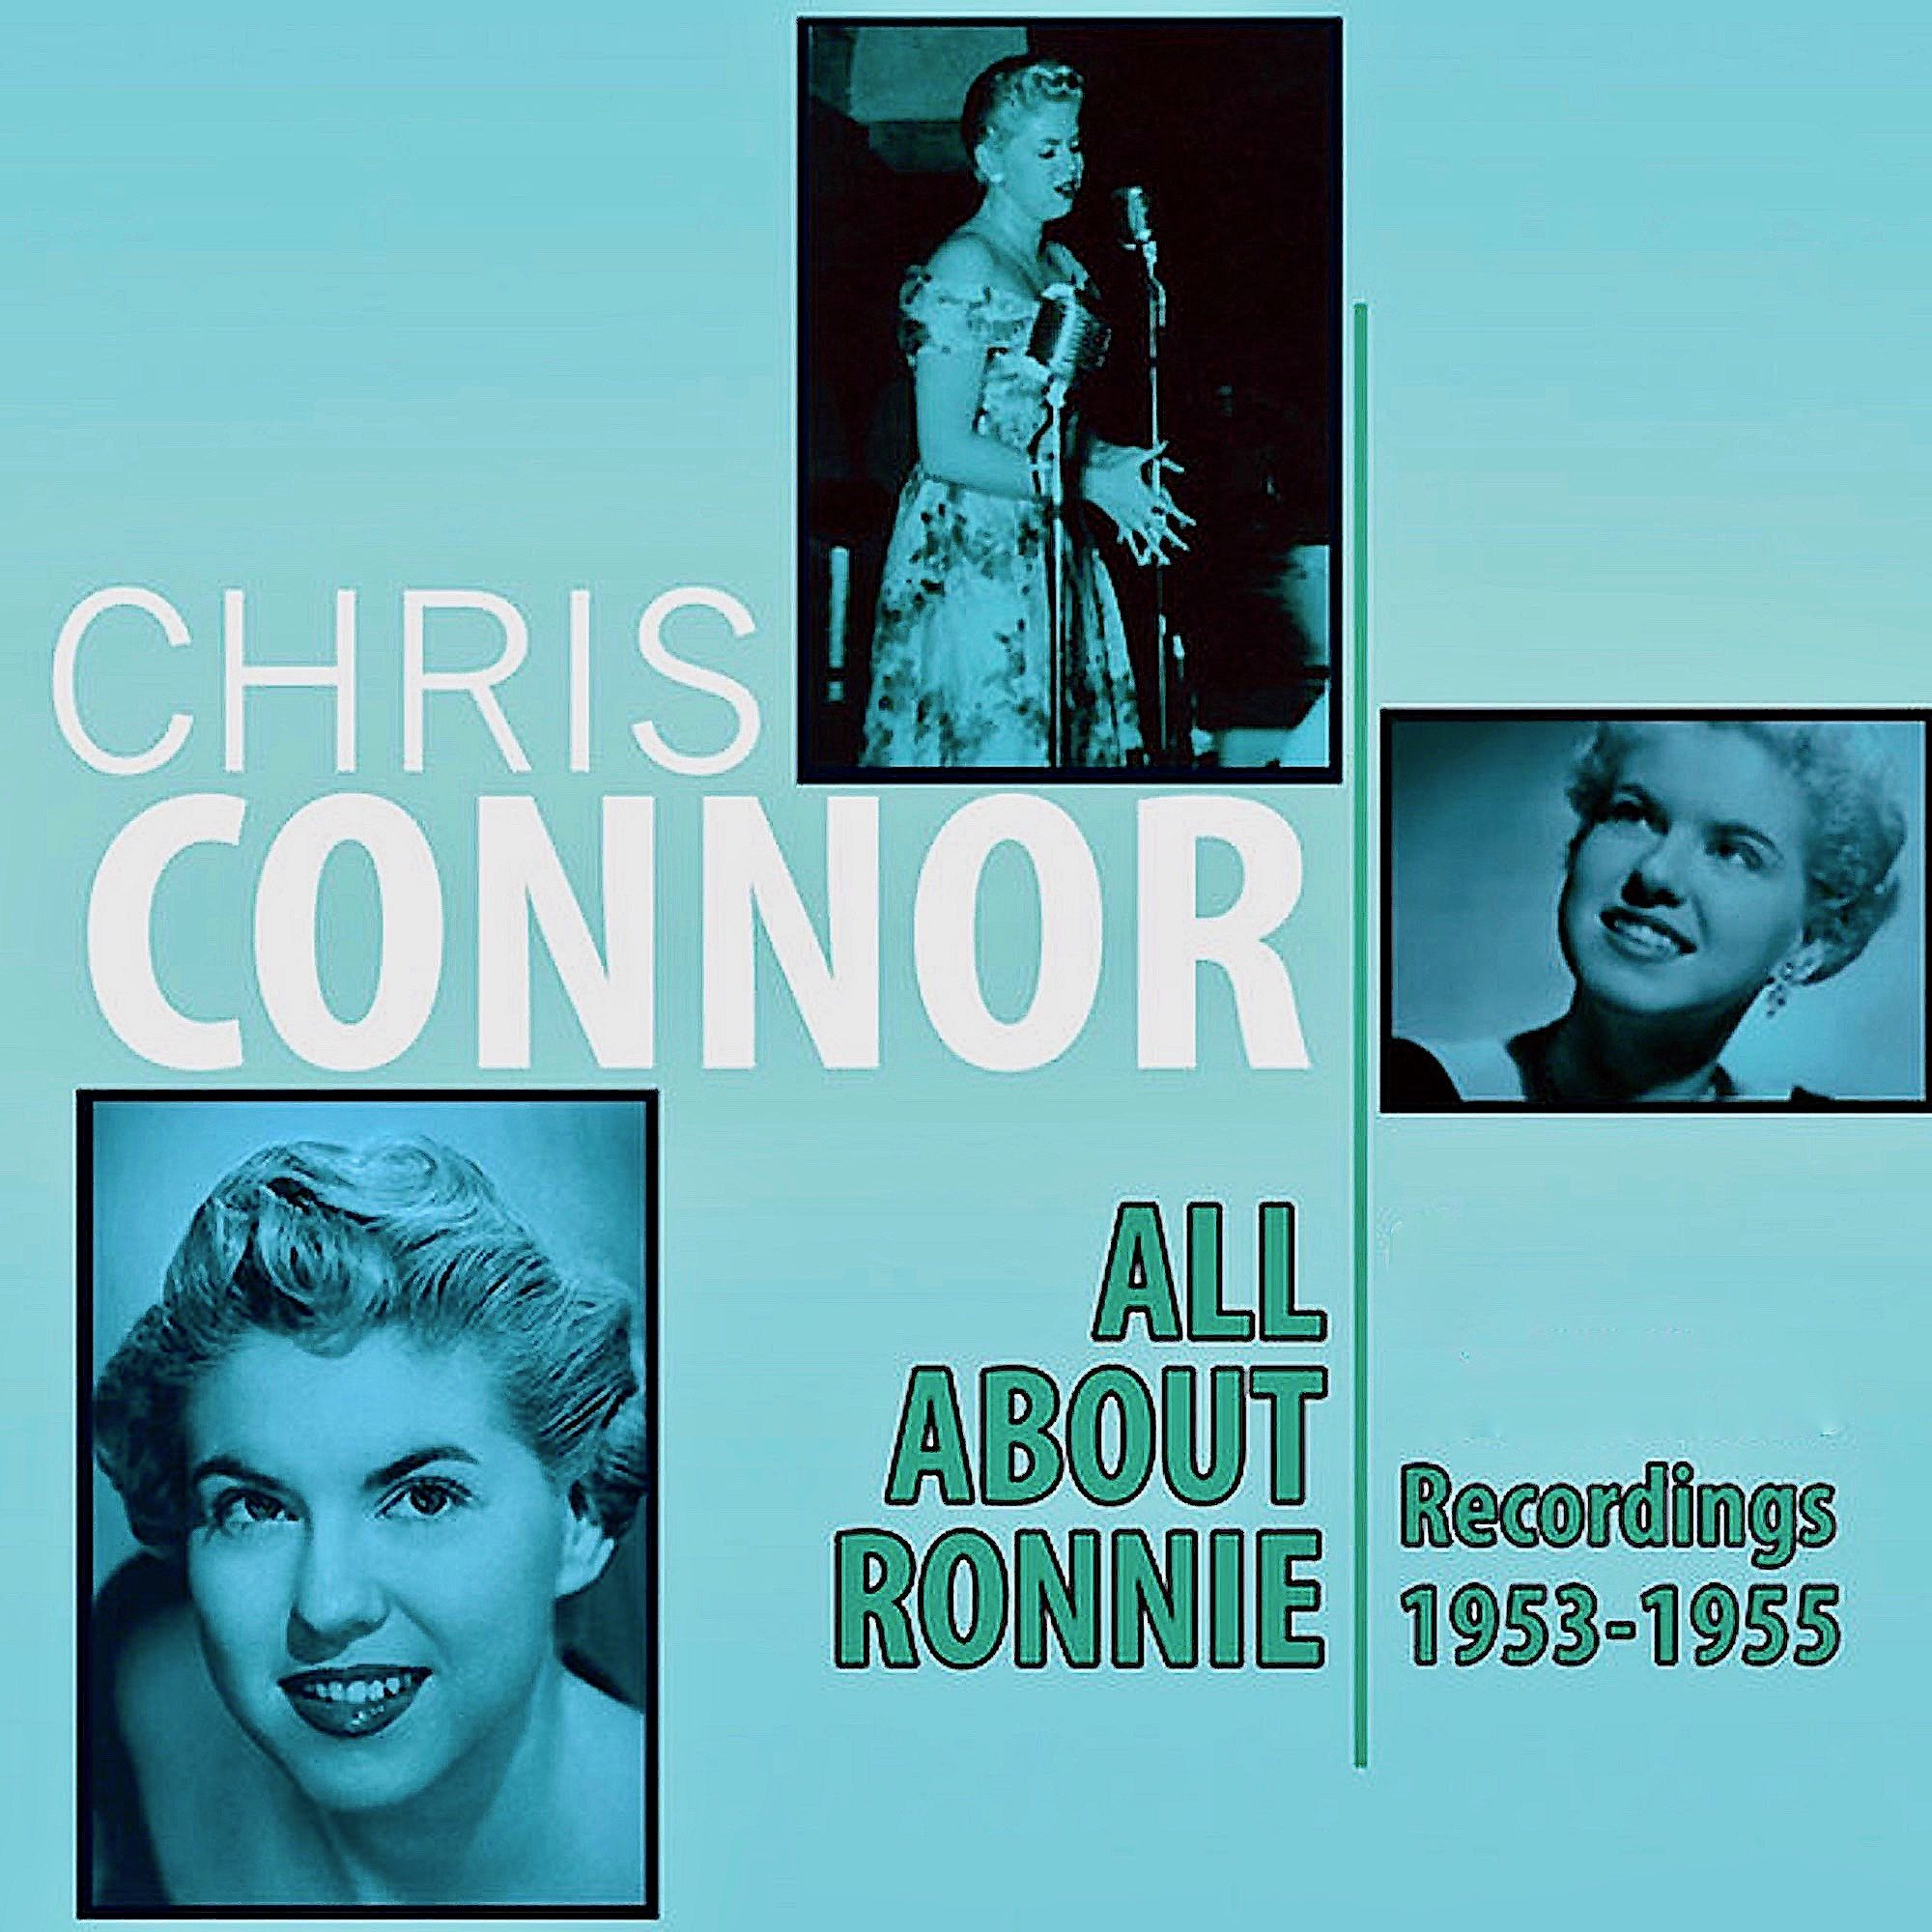 Chris Connor - All About Ronnie - Recordings 1953-55 Vol. 1 (2021) [FLAC 24bit/44,1kHz]